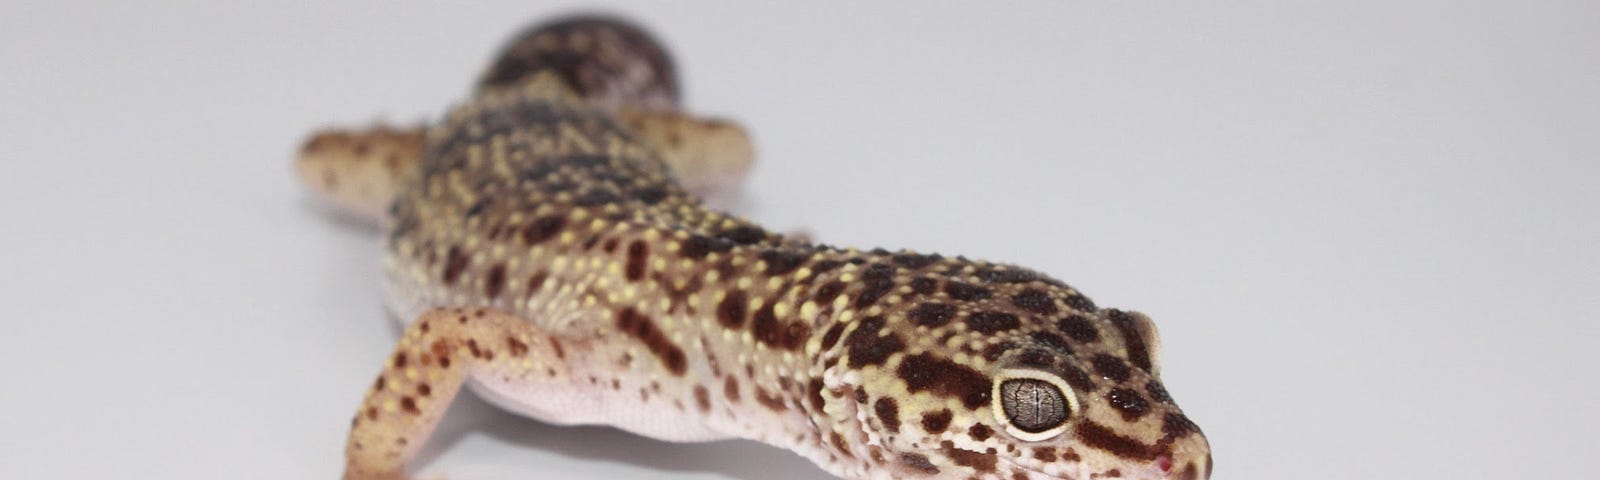 A yellow and black leopard gecko stands against a white background.